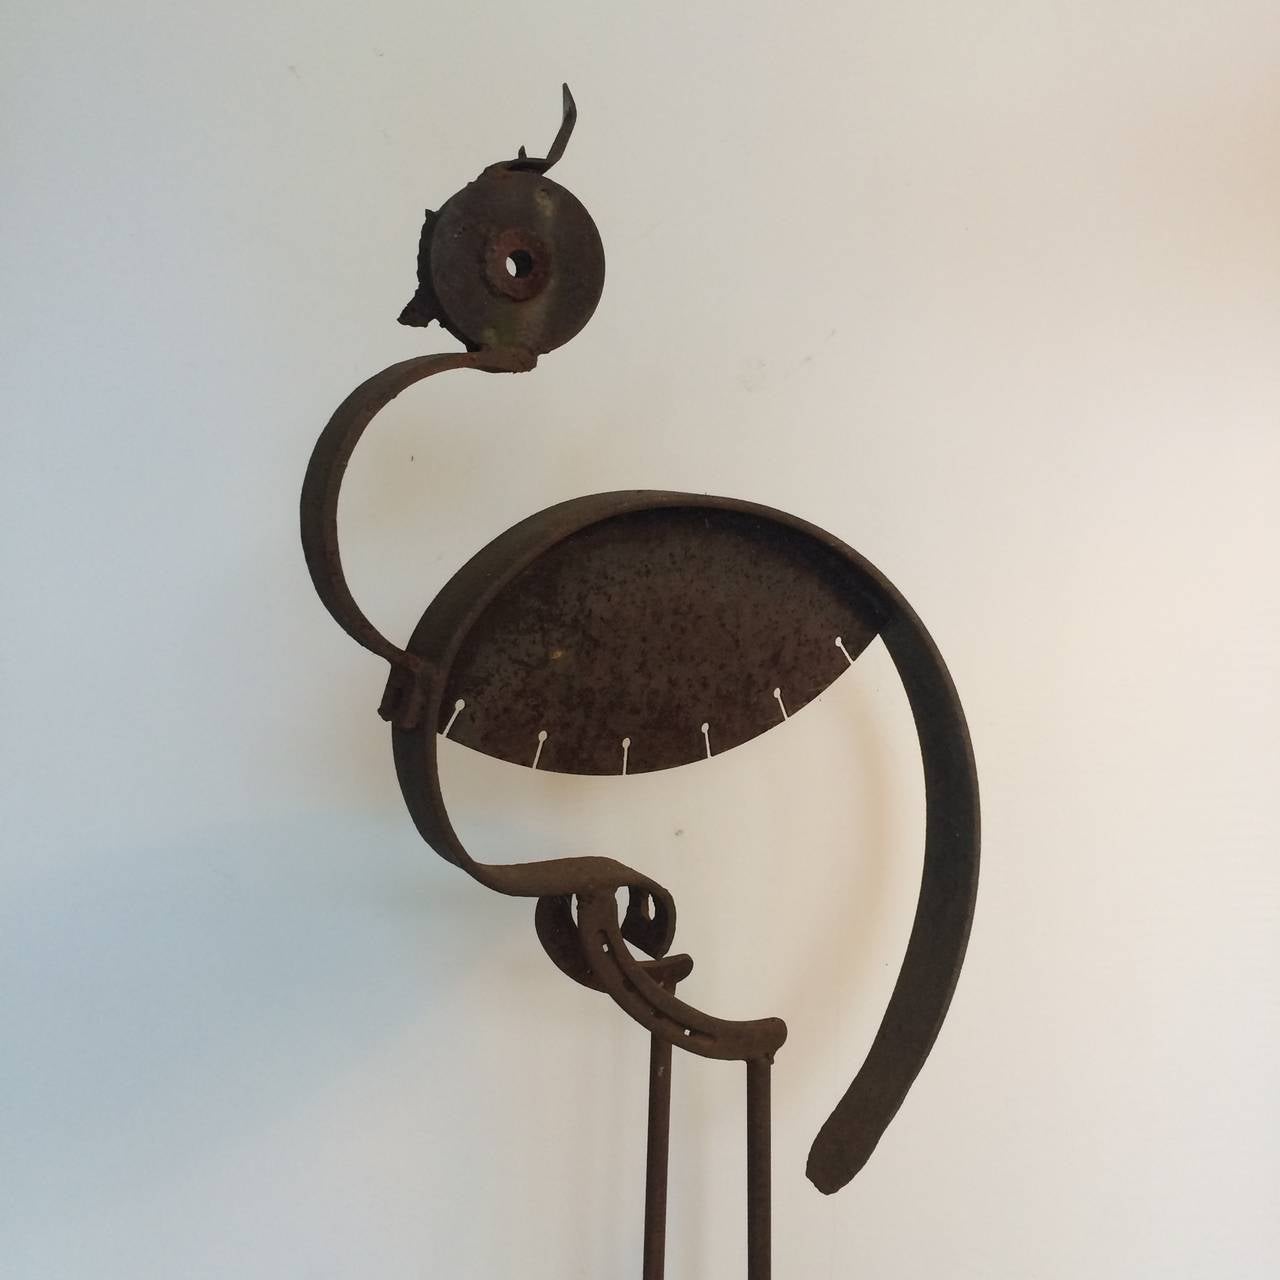 A full-scale iron sculpture of a Heron. Created from assembled iron parts. Saw blades, horseshoes and can opener fuse together to create a dynamic and whimsical sculpture. Signed on the base 